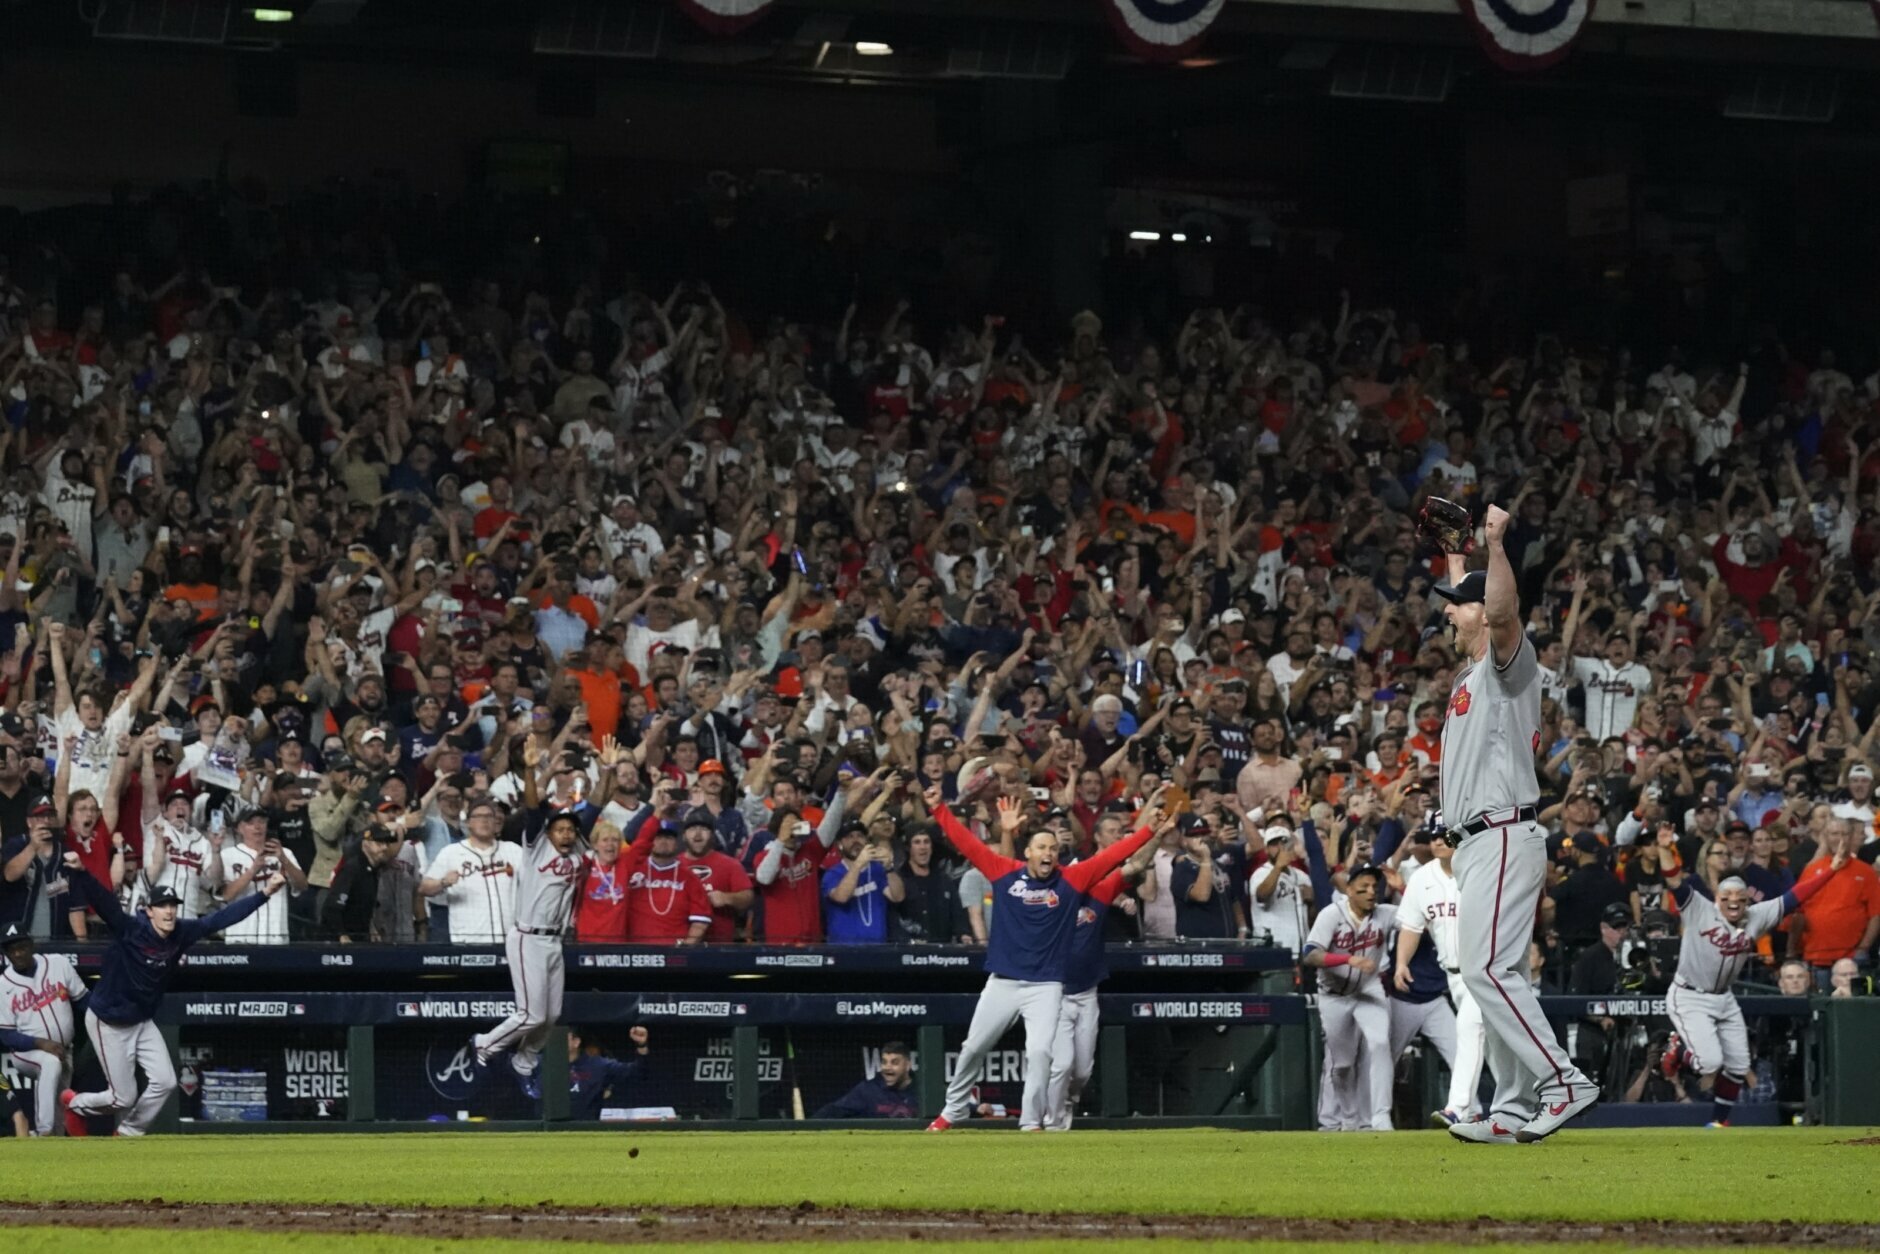 Hammerin' Braves win 1st WS crown since 1995, rout Astros